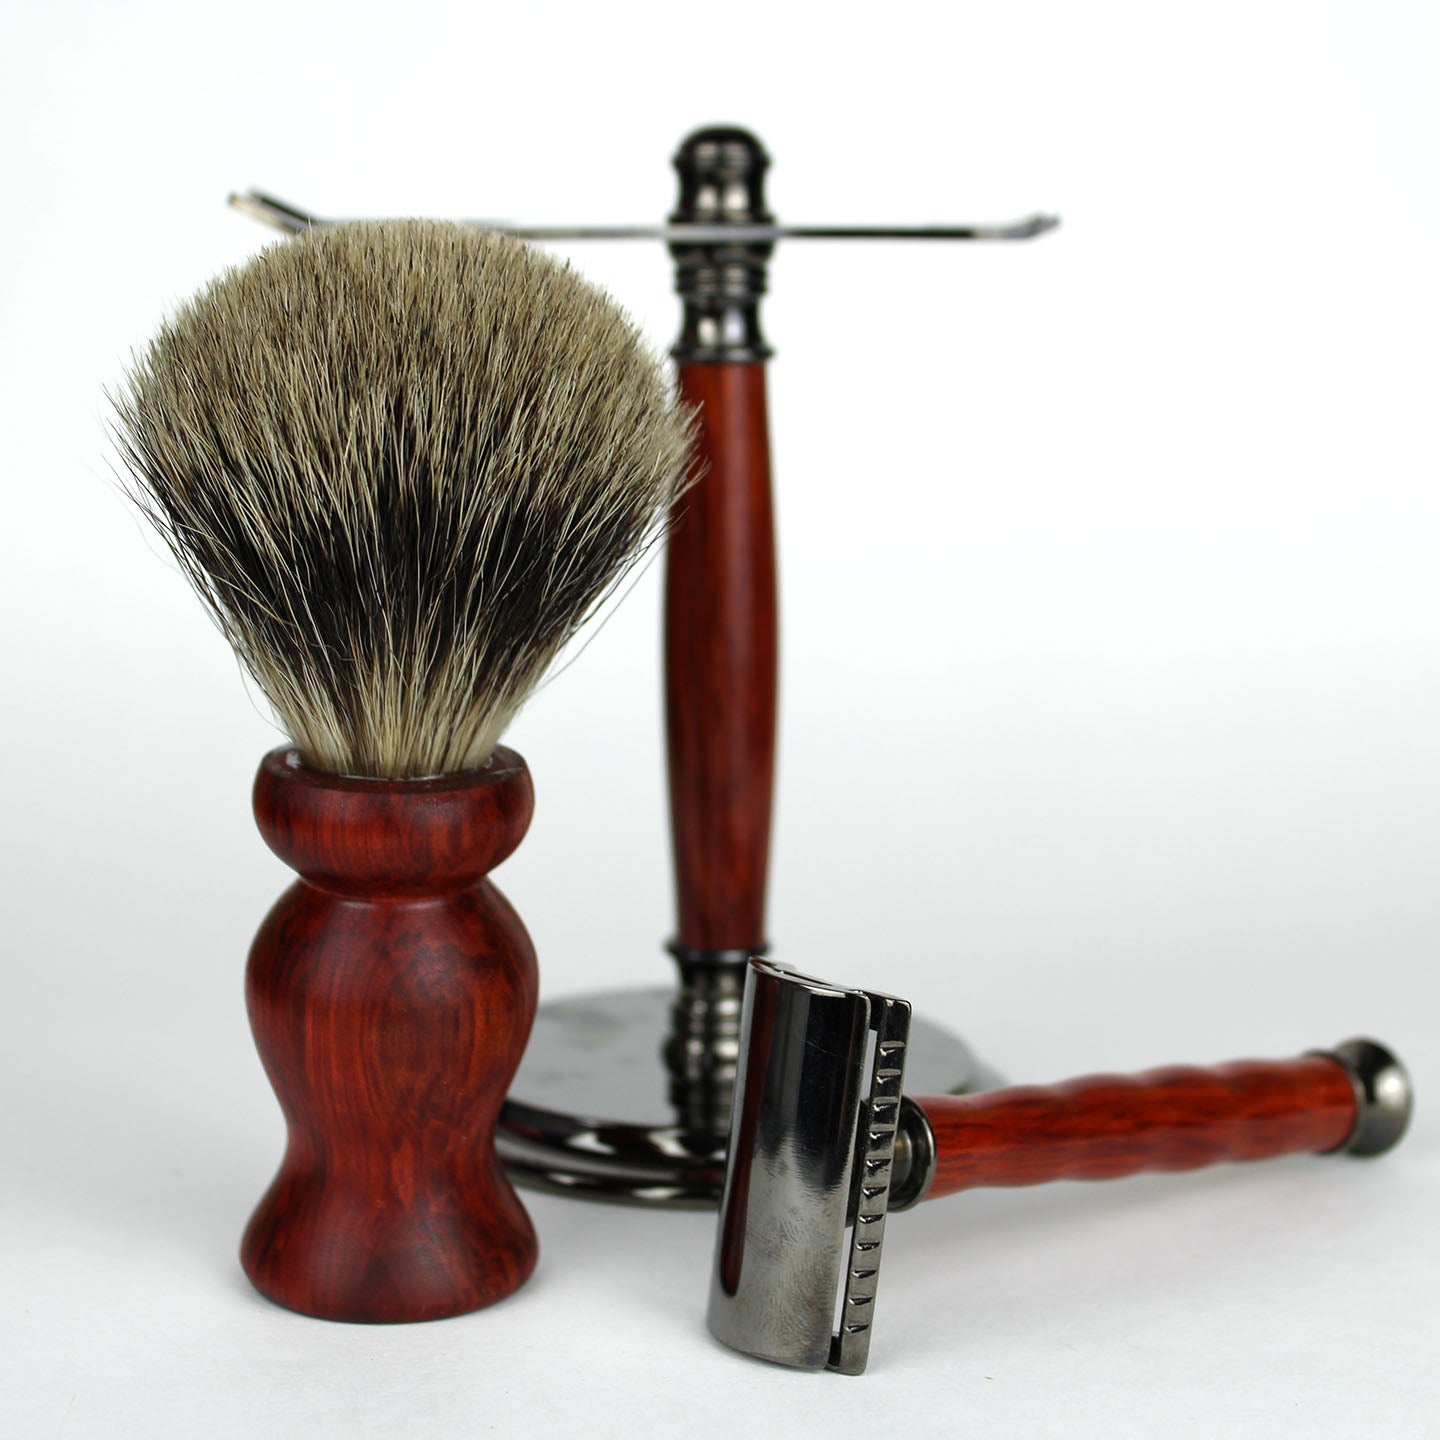 Scoundrel's Deluxe Shave Kit